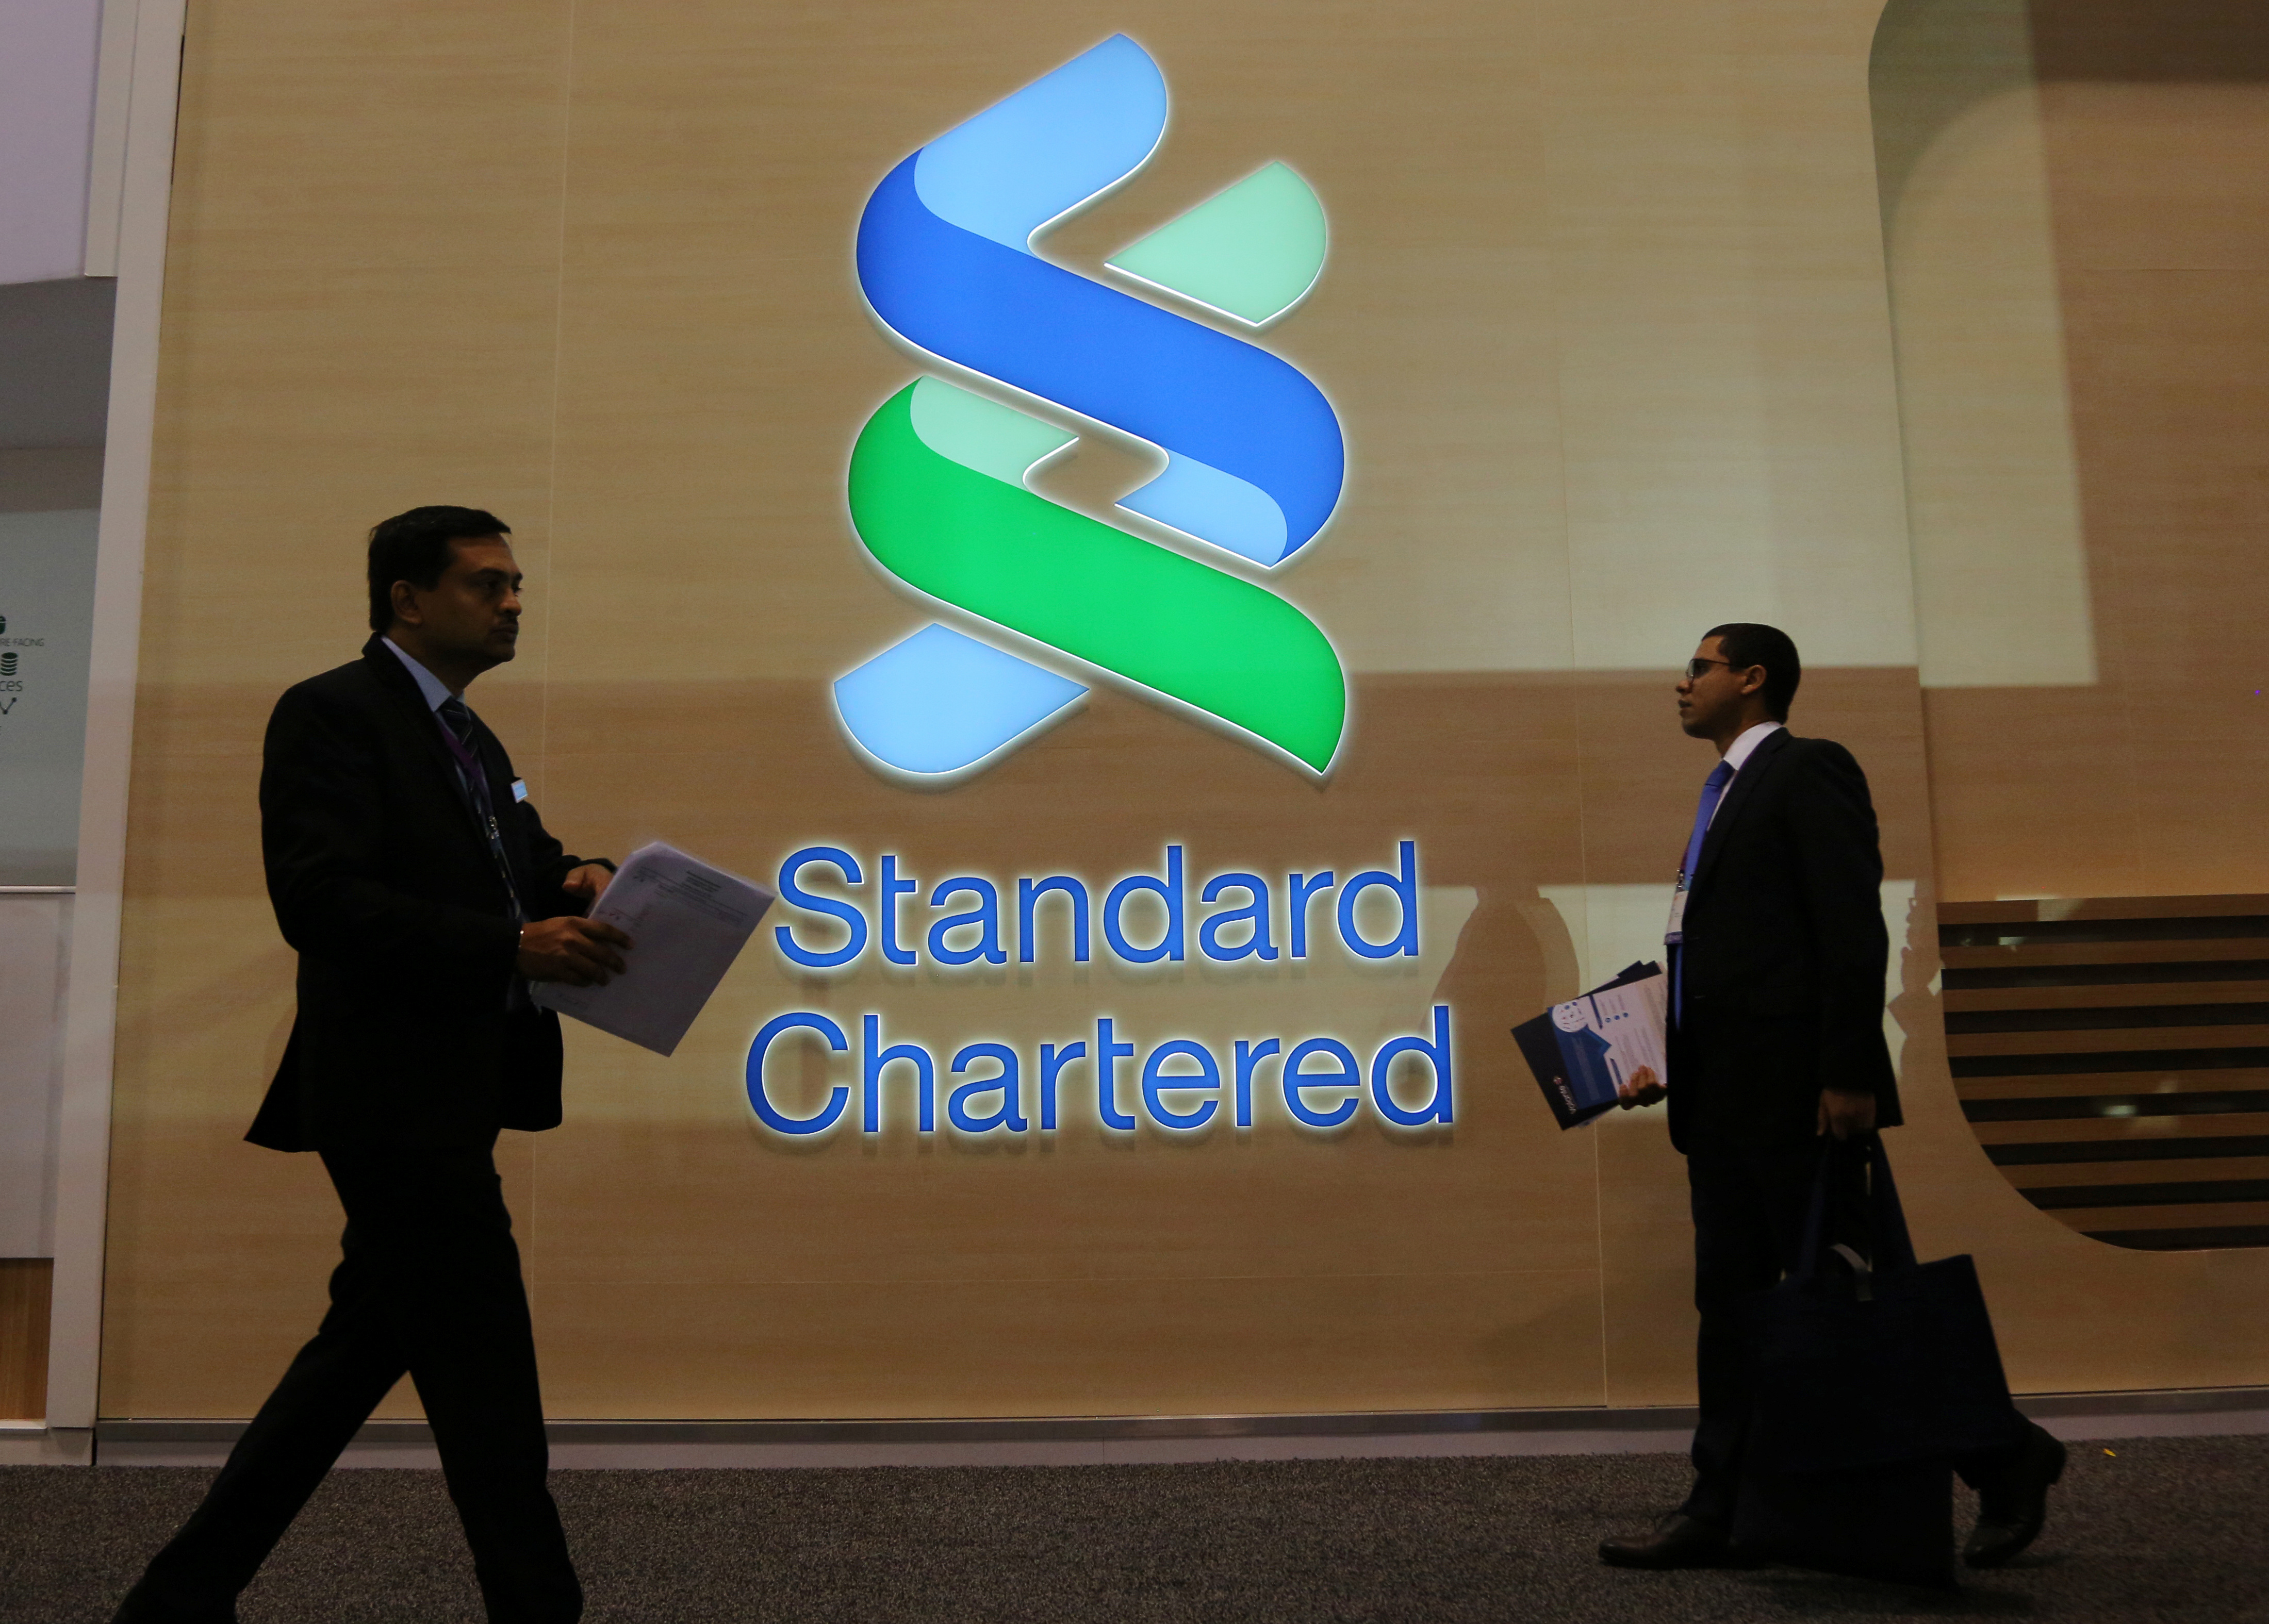 People pass by the logo of Standard Chartered plc at the SIBOS banking and financial conference in Toronto